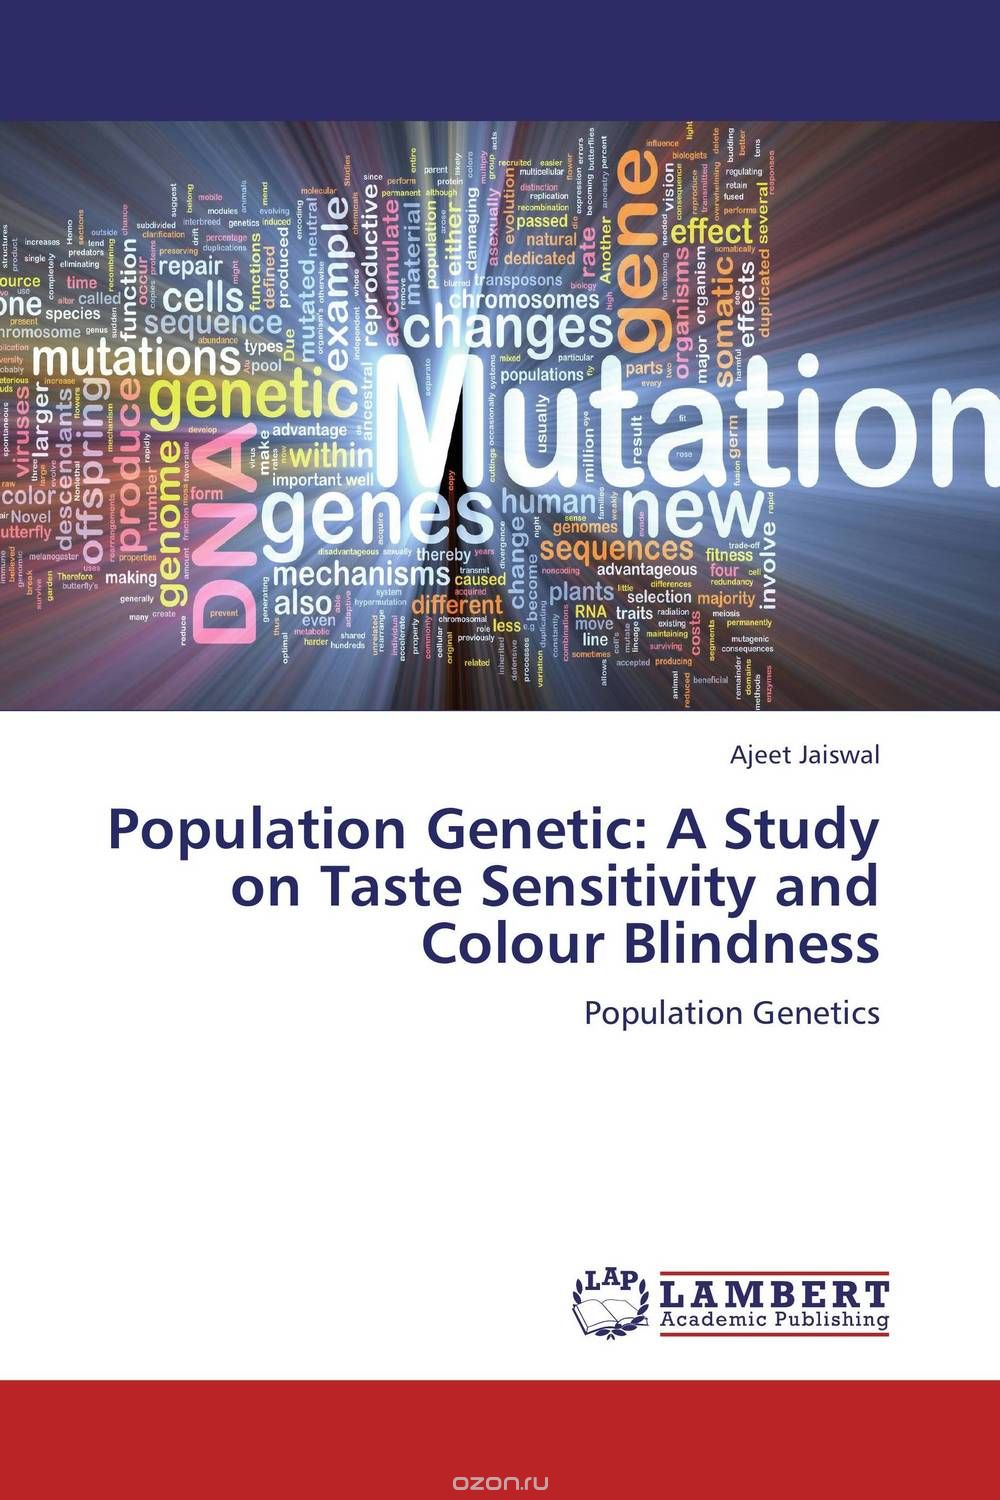 Population Genetic: A Study on Taste Sensitivity and Colour Blindness